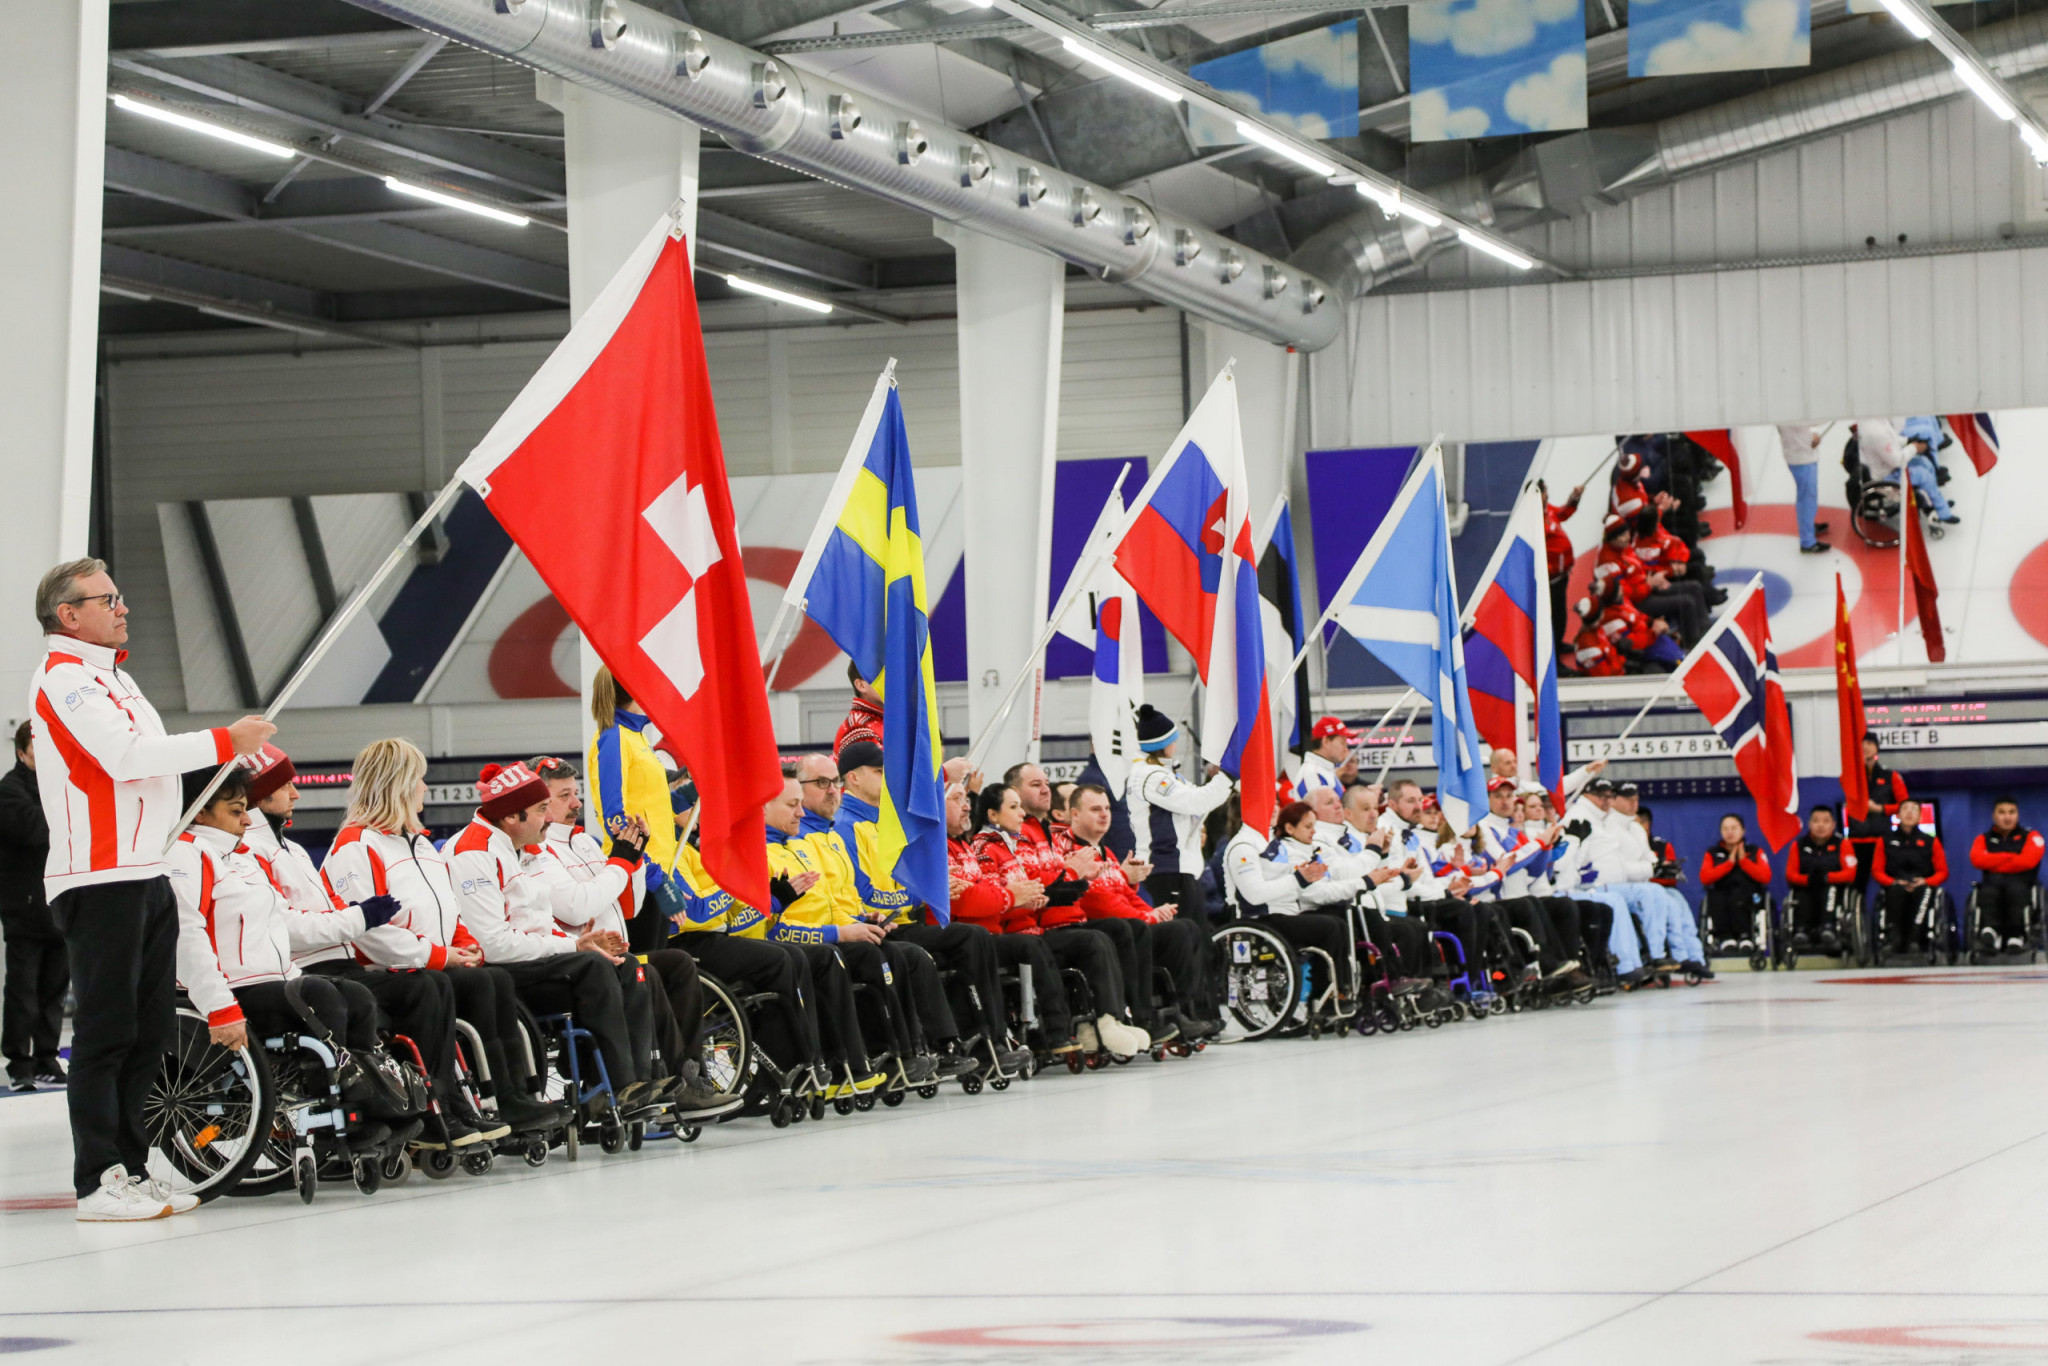 The World Wheelchair Curling Championships started in Wetzikon, Switzerland, today ©World Curling